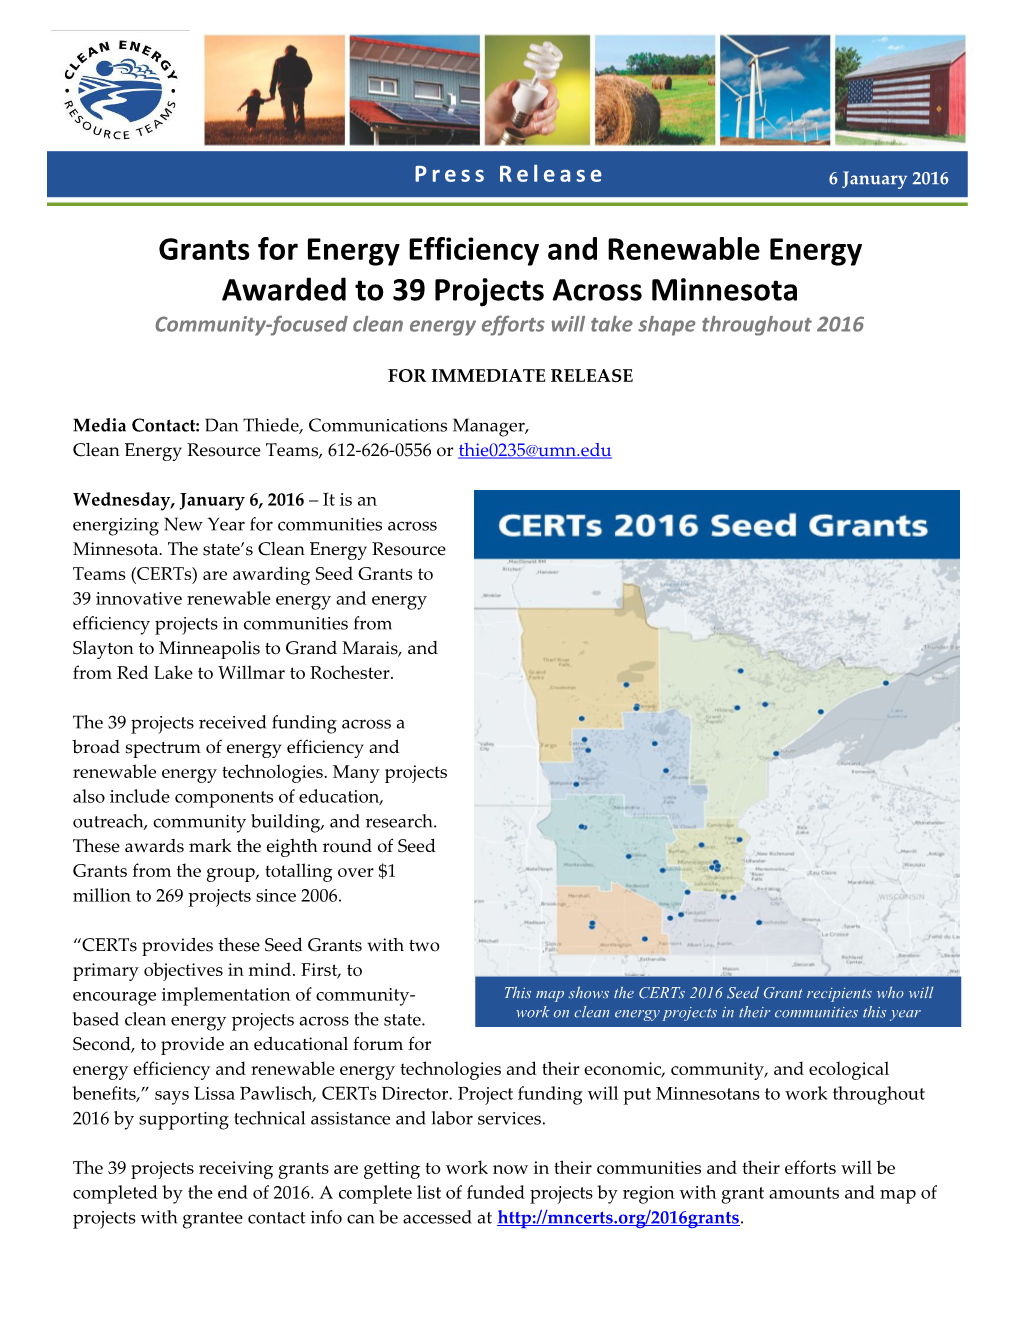 Grants for Energy Efficiency and Renewable Energy Awarded to 39 Projects Across Minnesota